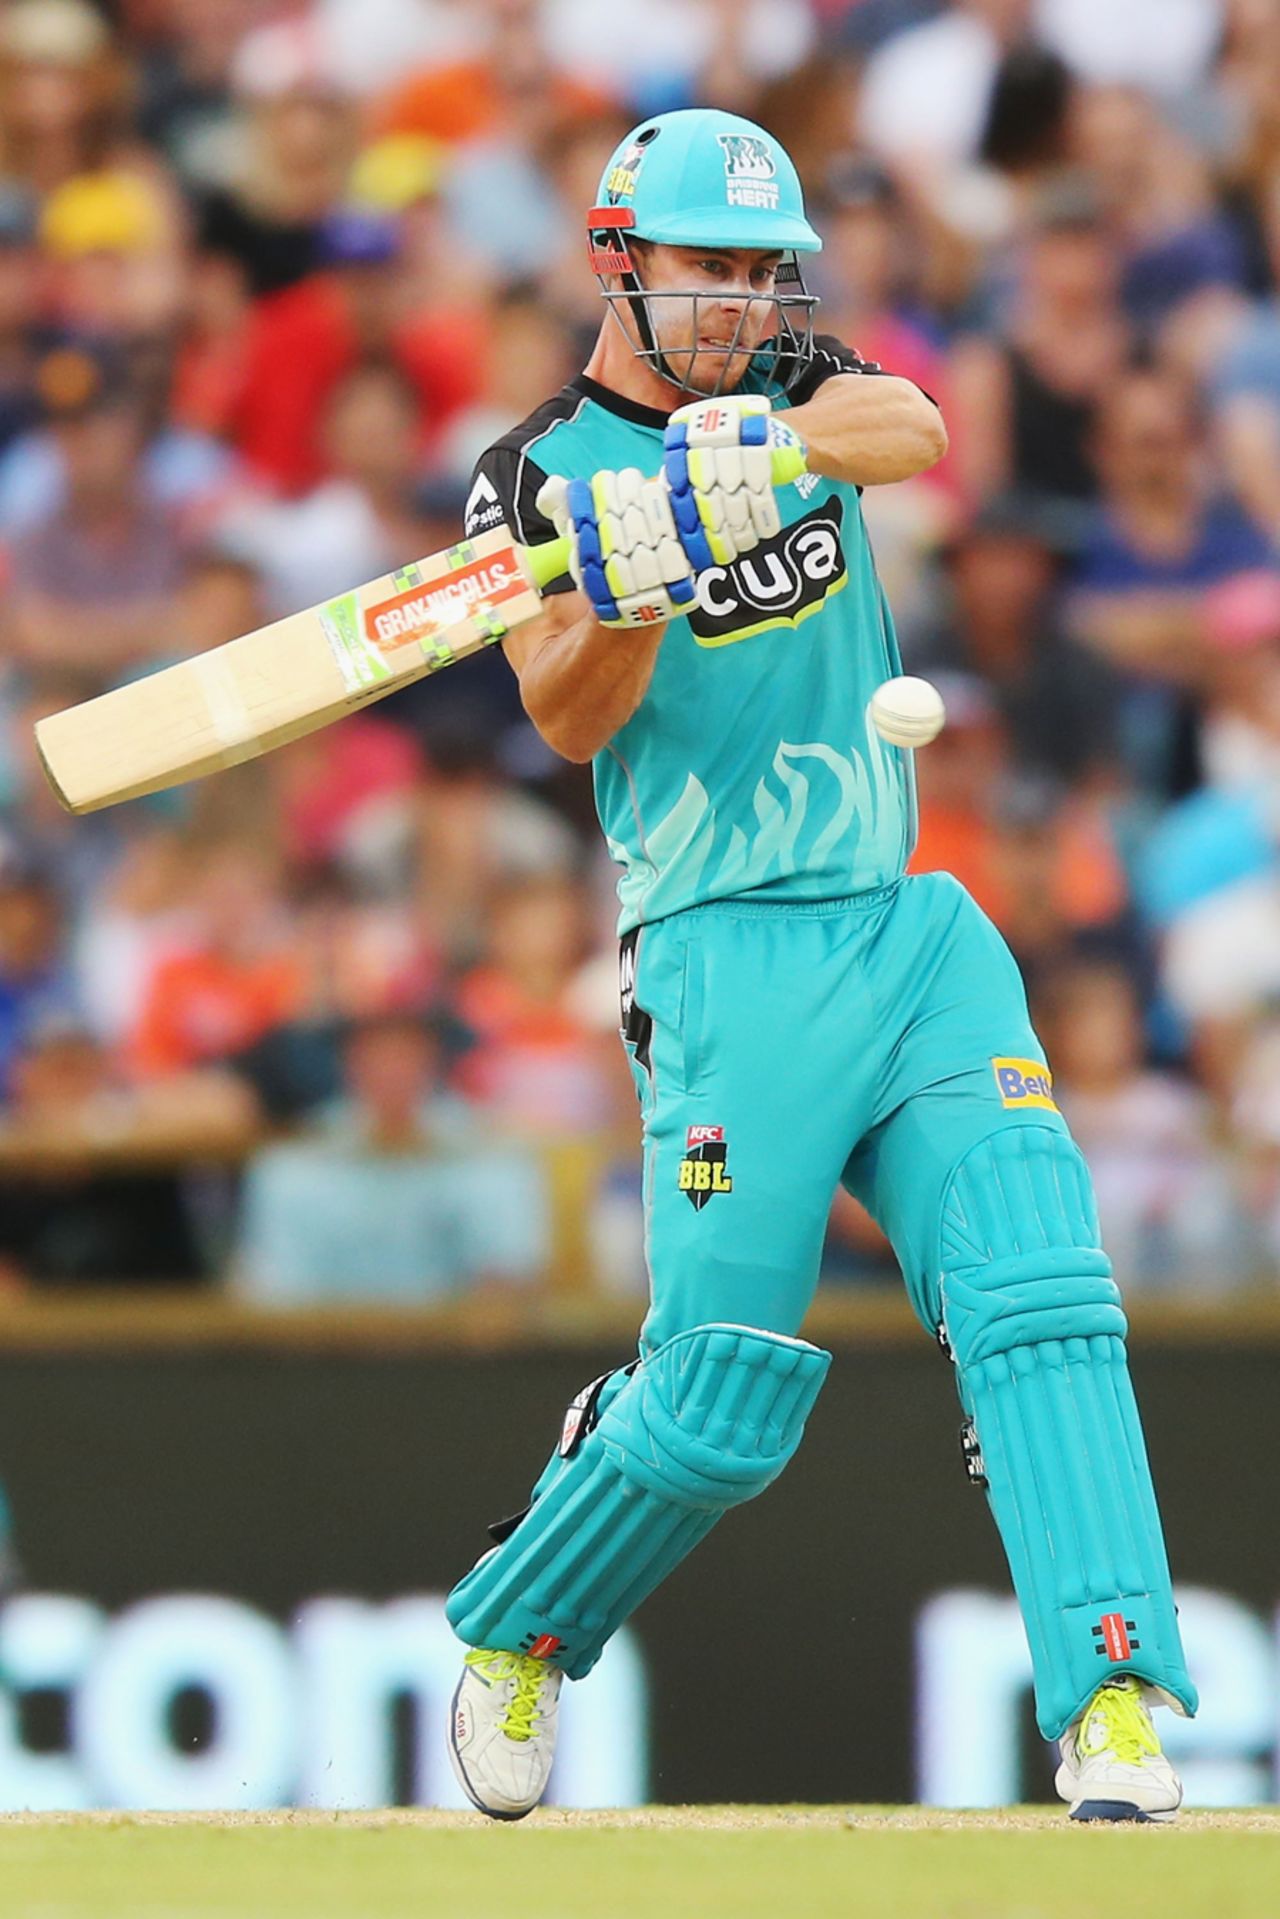 Chris Lynn shapes up to hit one for six, Scorchers v Heat, Big Bash League 2016-17, Perth, January 5, 2017